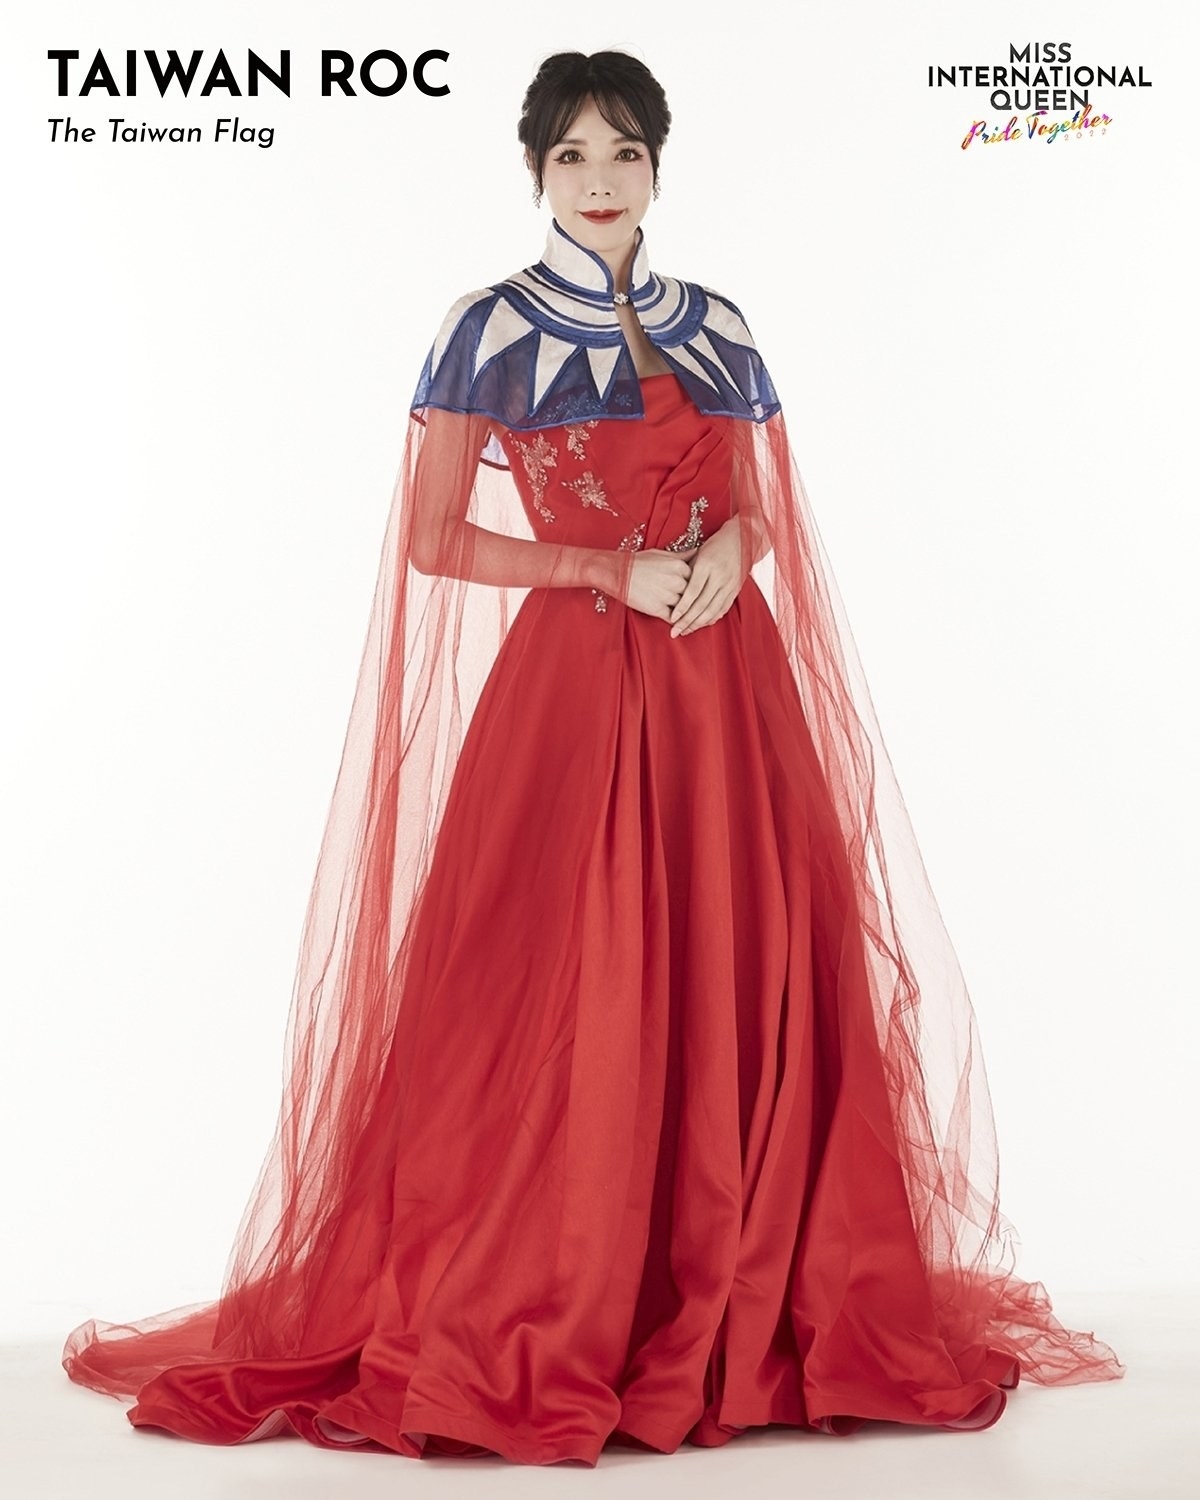 Miss Taiwan in an outfit with a blue and white shoulderpiece and long red dress